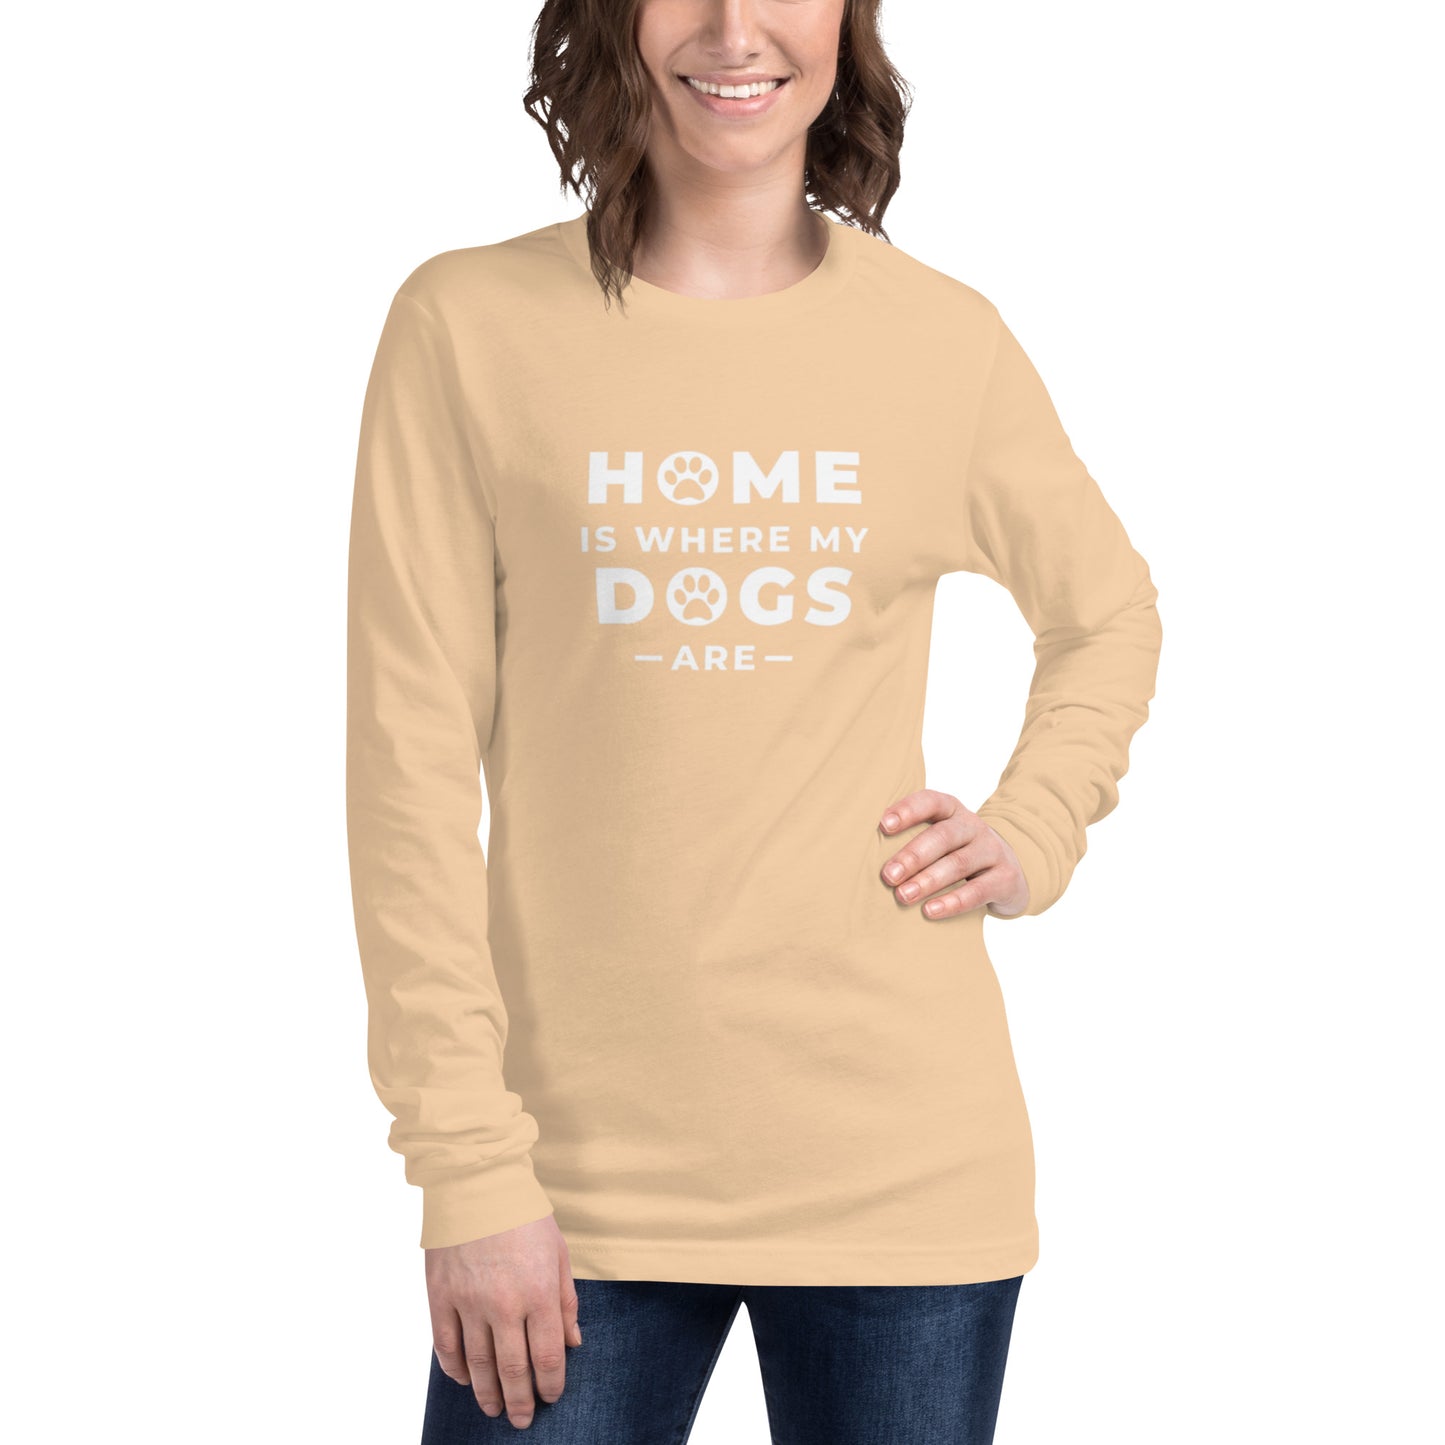 Unisex Long Sleeve Tee with print "Home is where my dogs are"